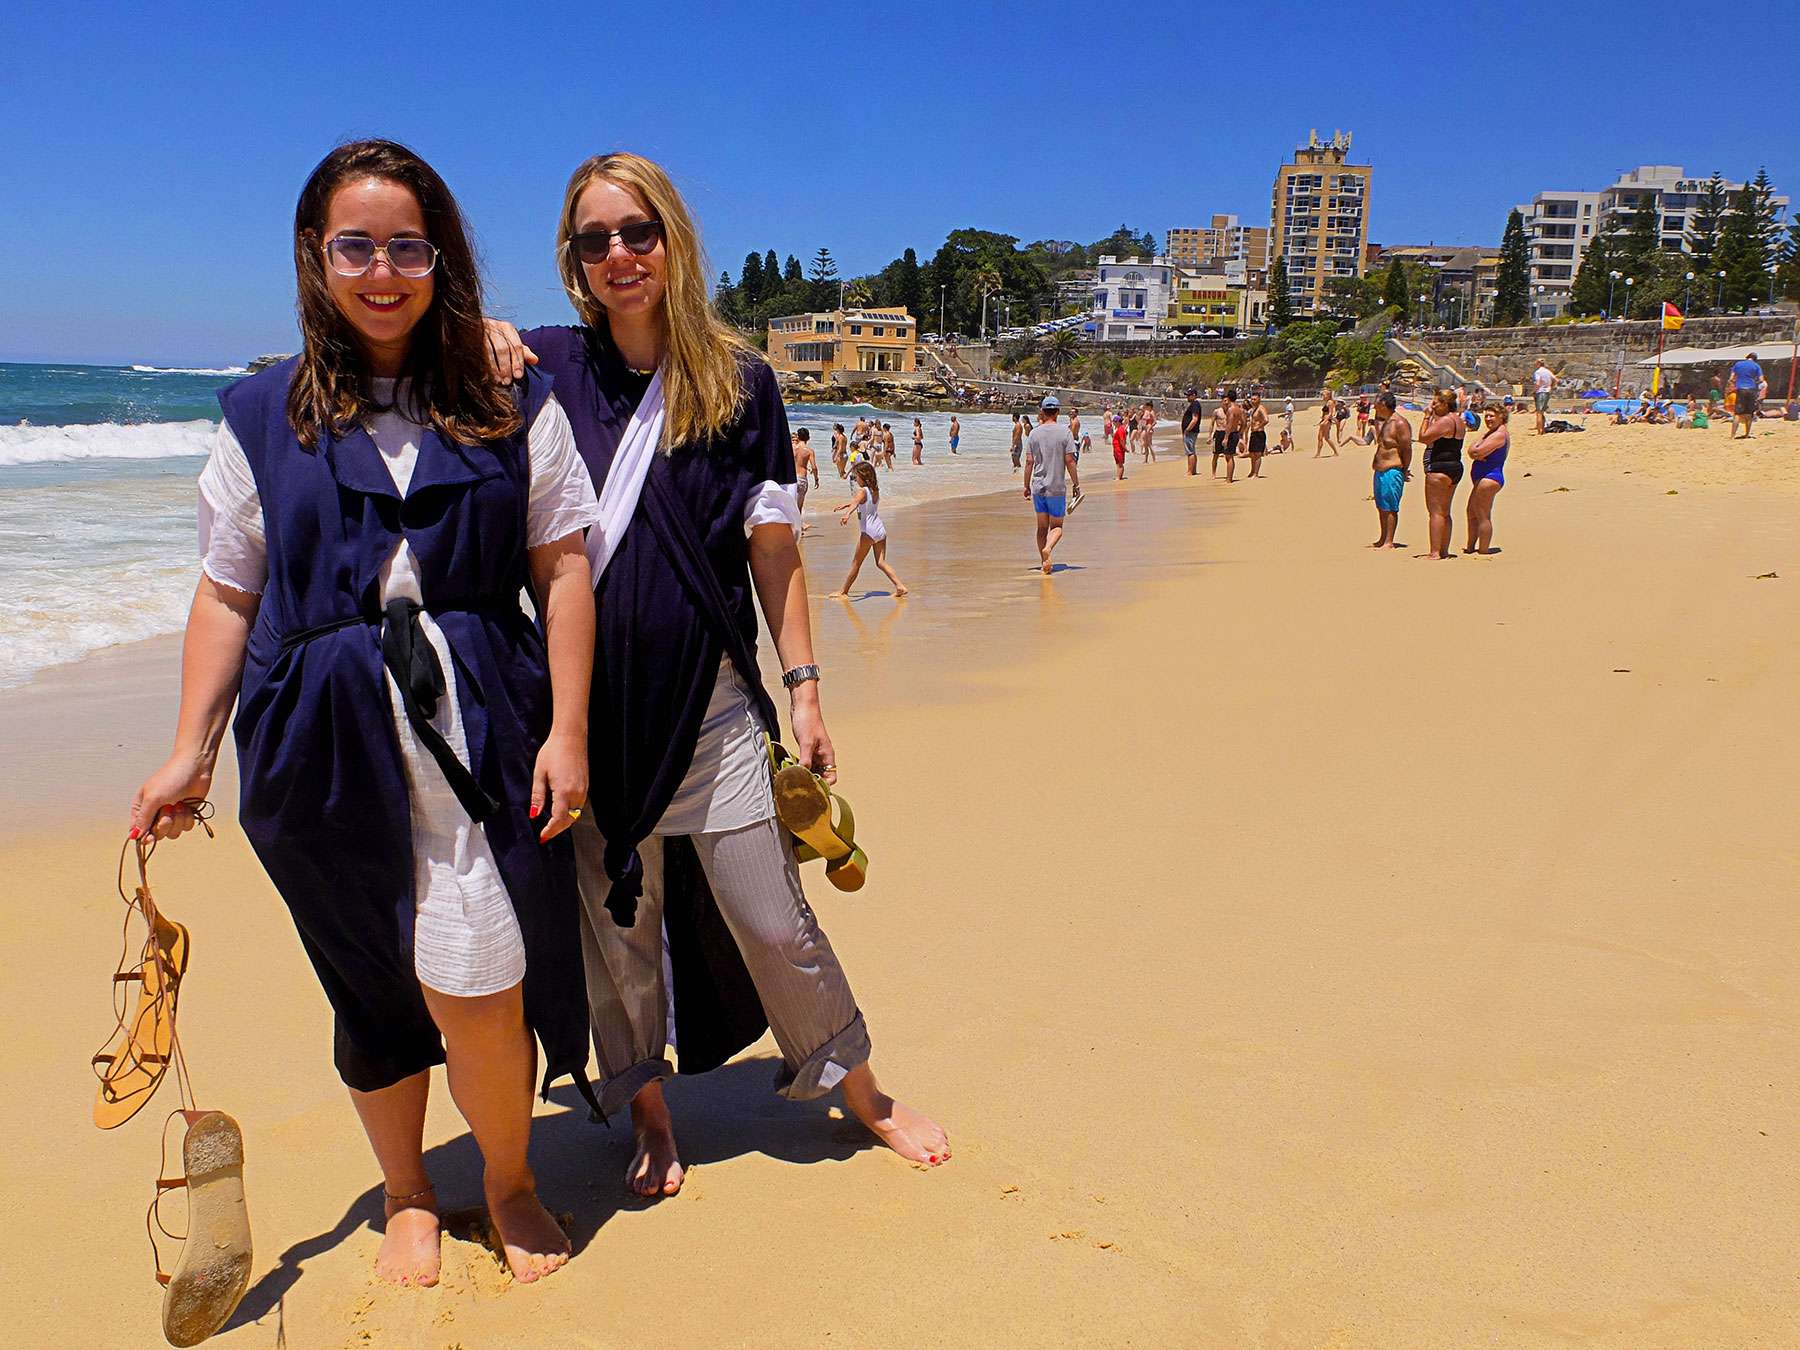 Sydney sisters build empire with man-repelling Orthodox Jewish fashion